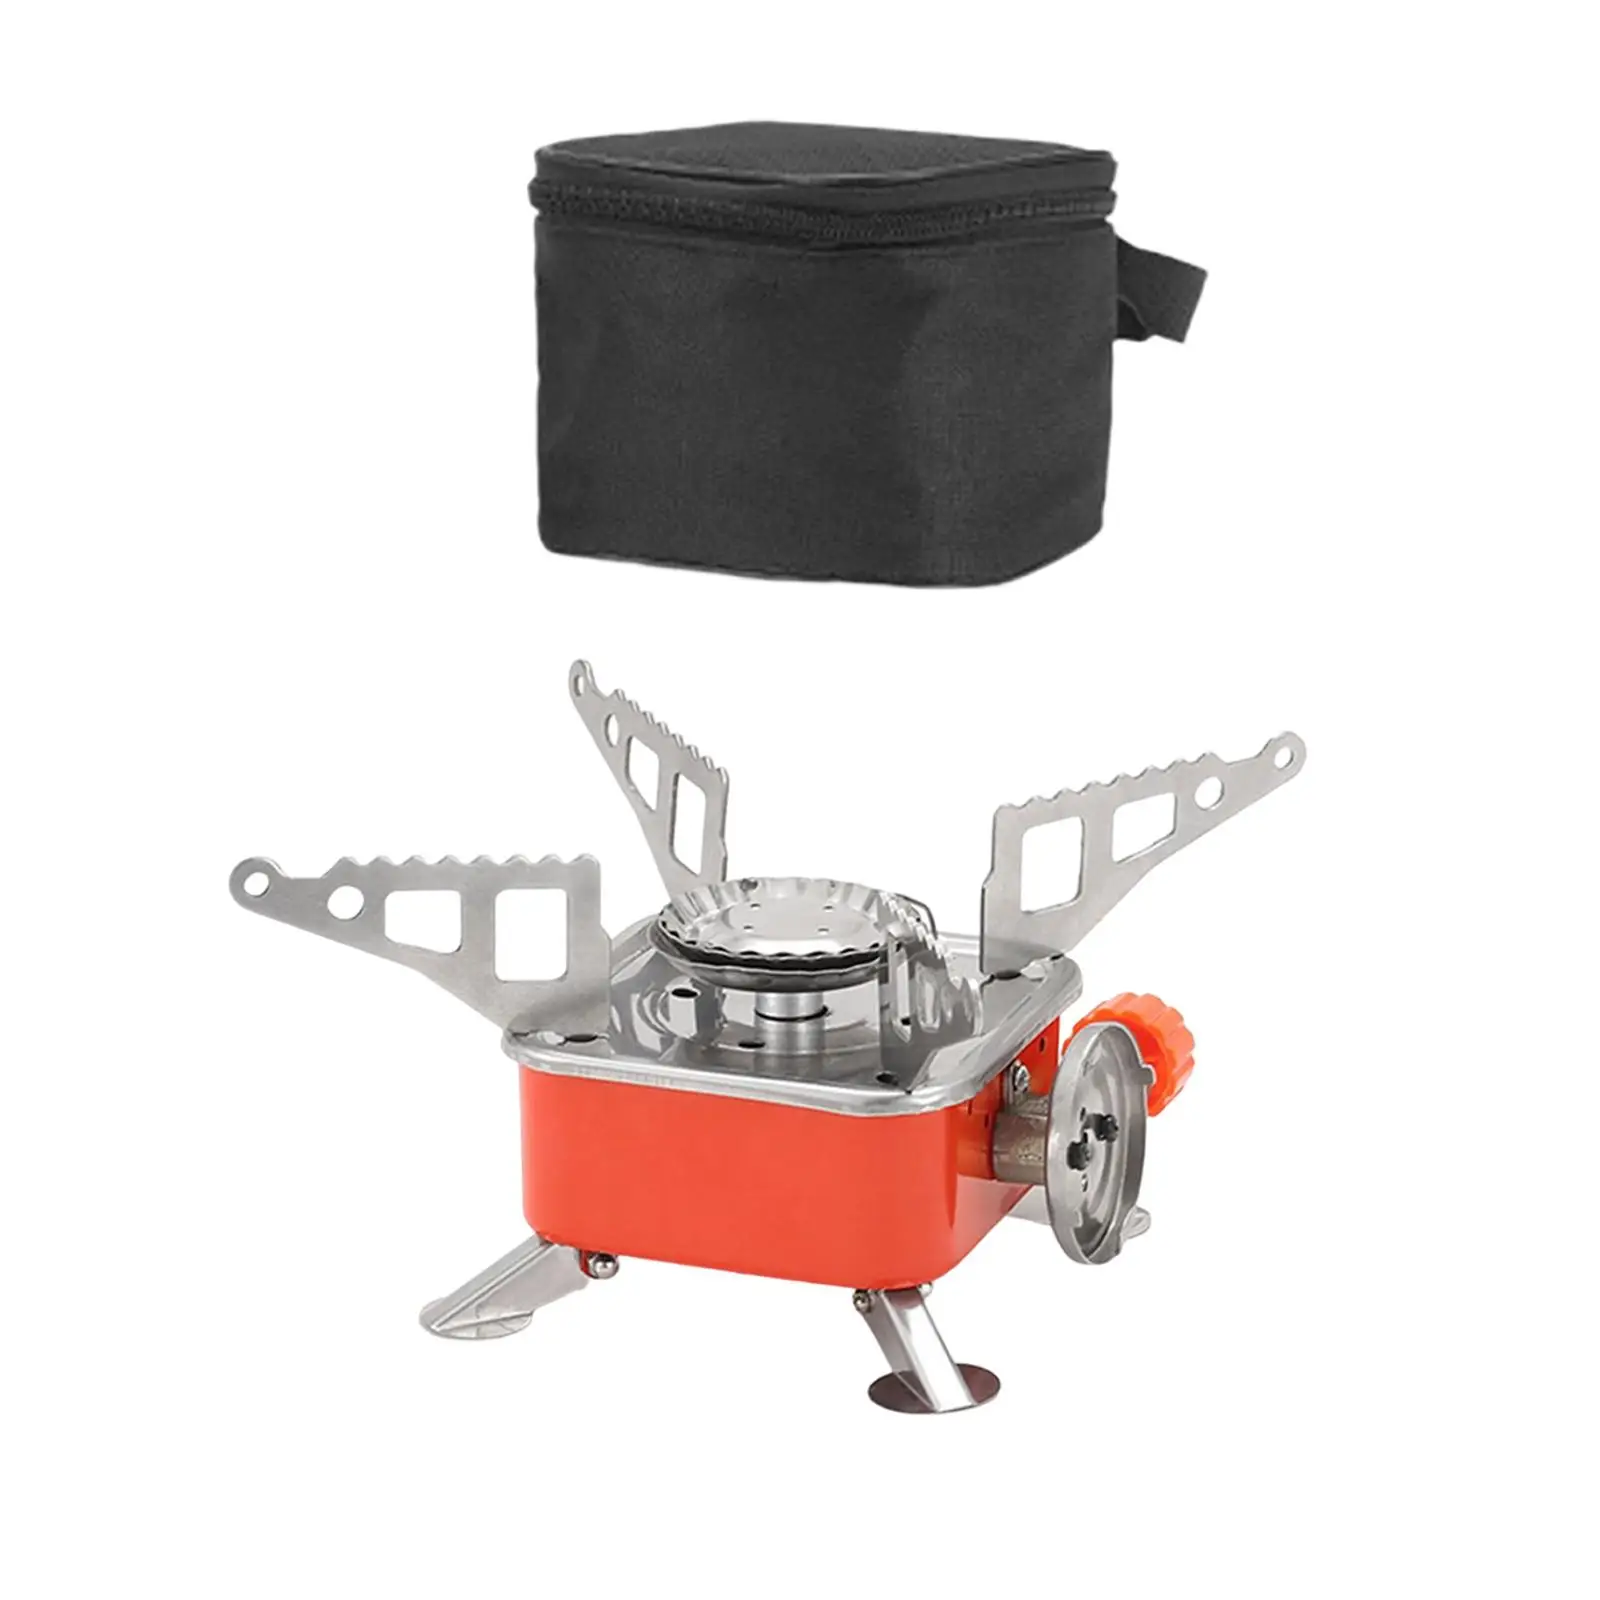 Portable Camping Gas Stove Foldable with Piezo Ignition Mini Cooker Gear for Hiking